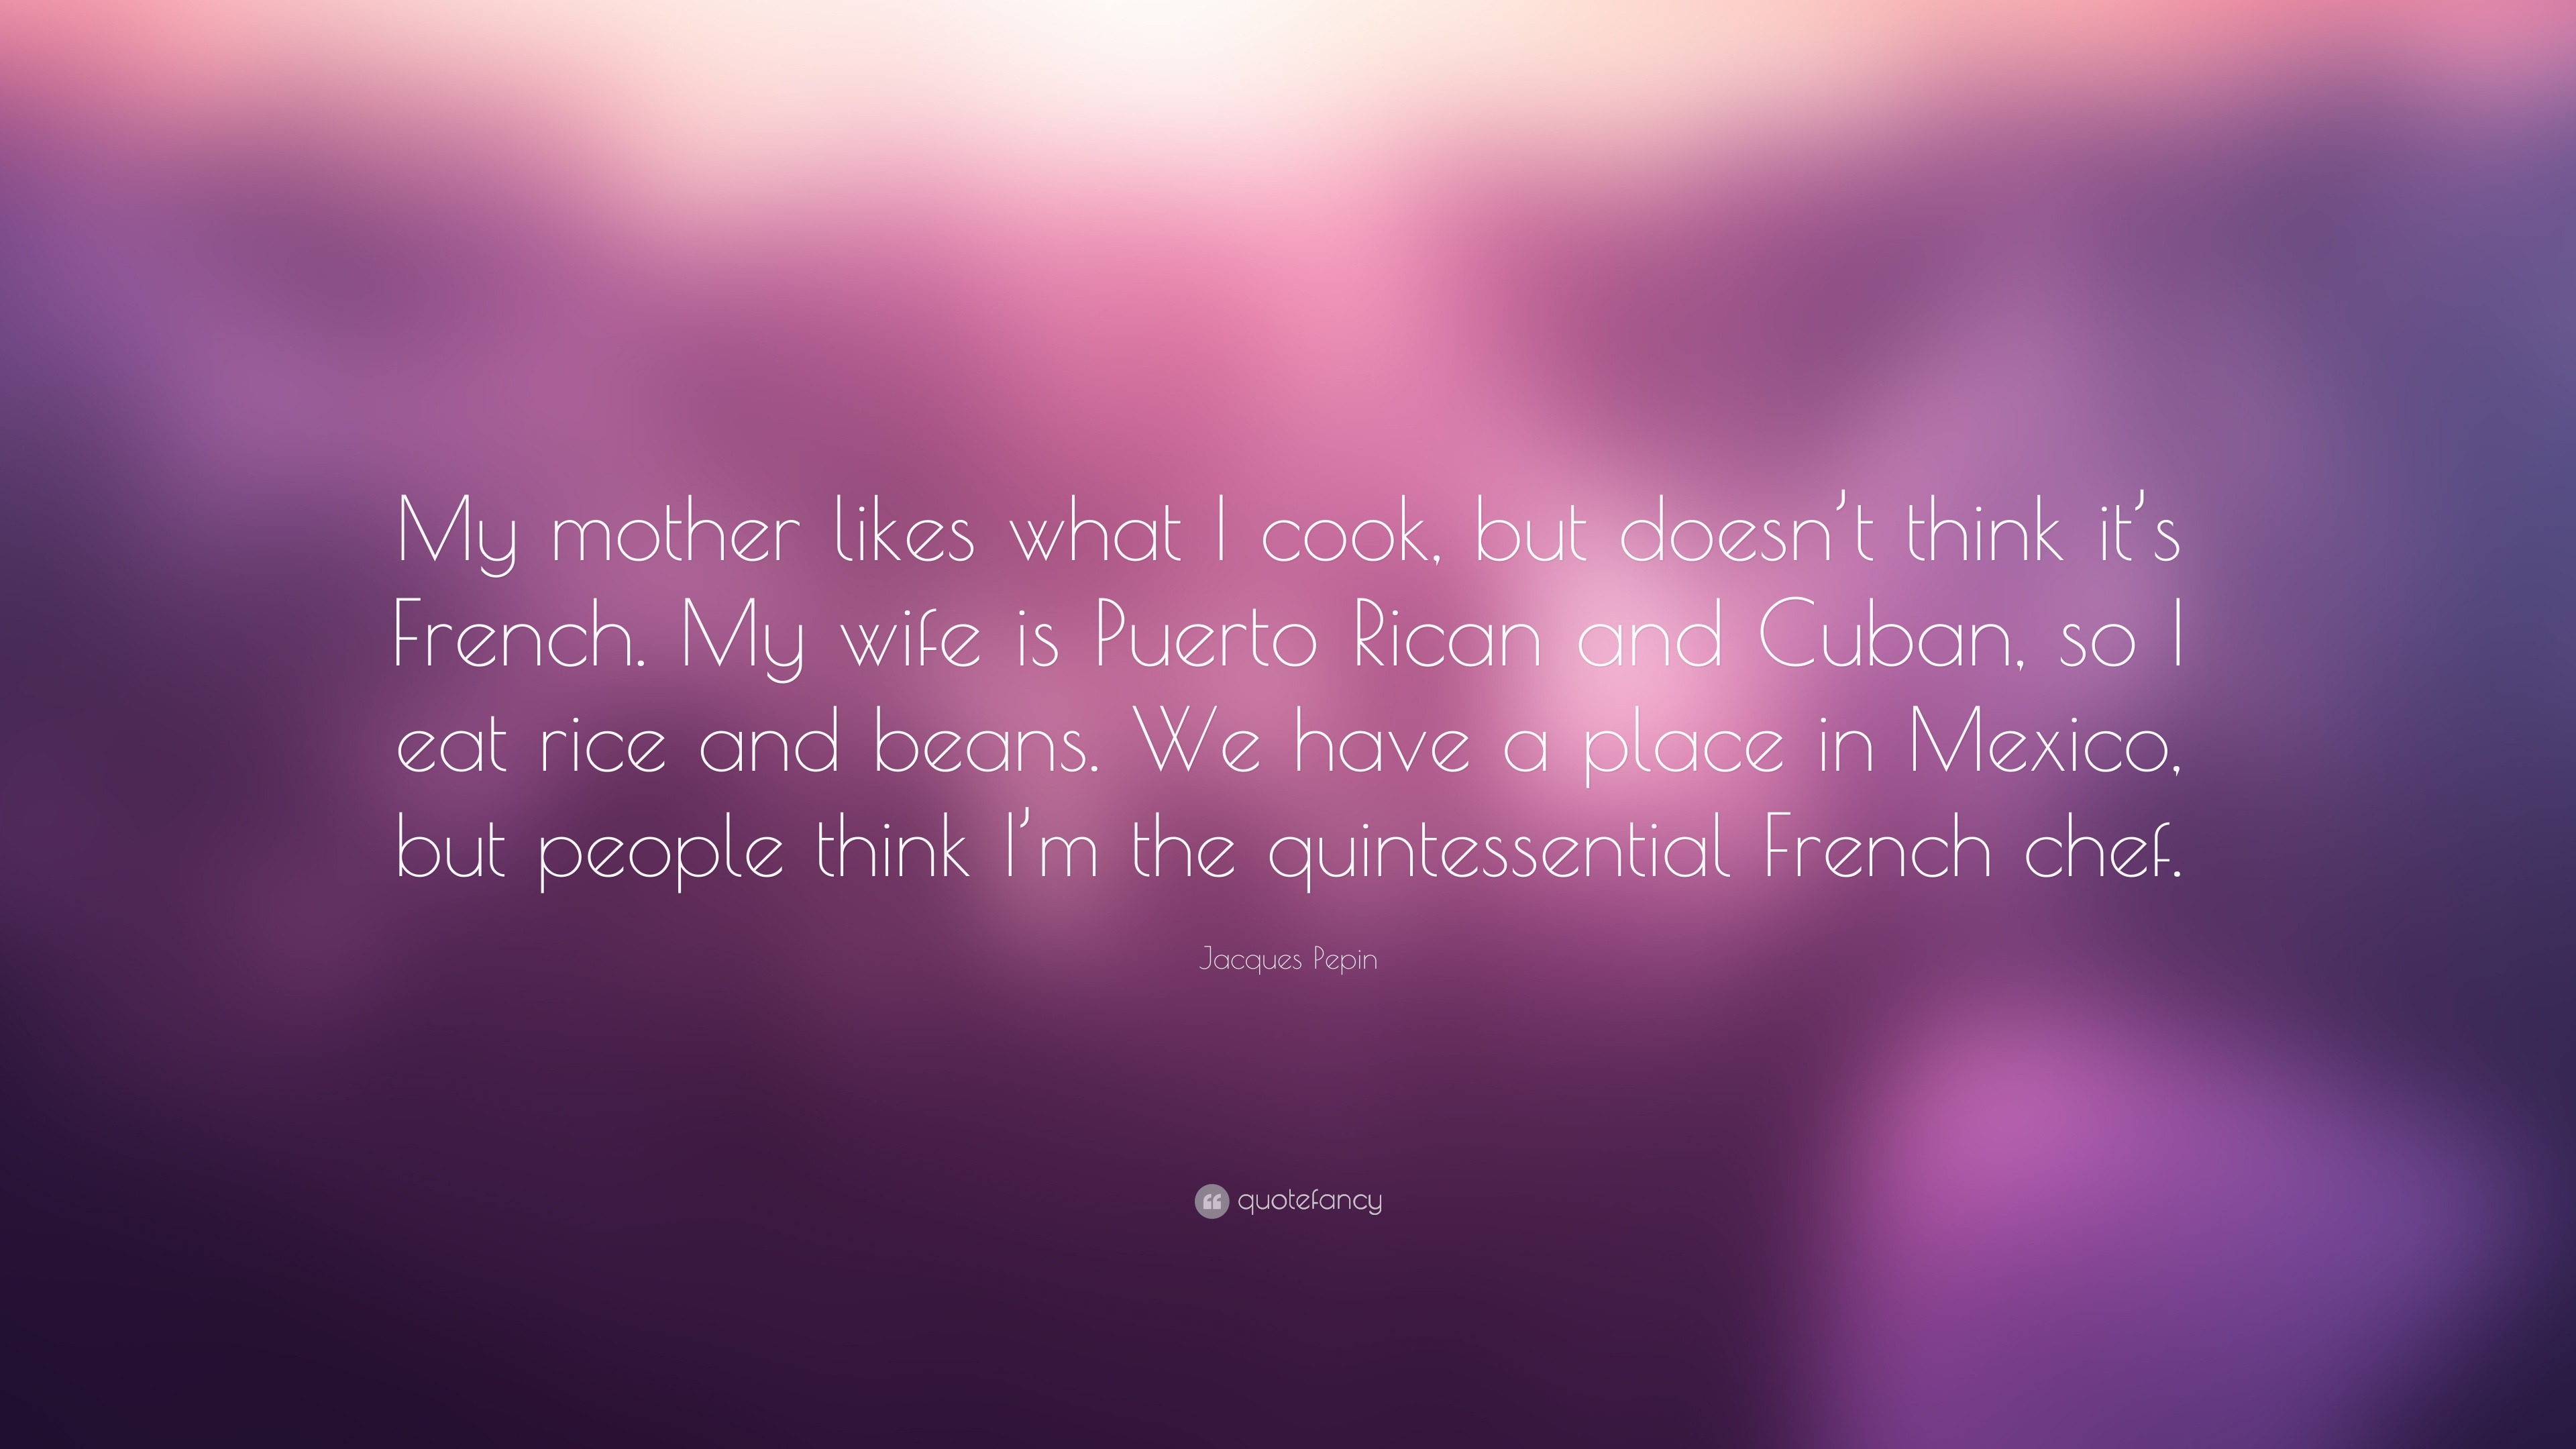 https://quotefancy.com/media/wallpaper/3840x2160/1053251-Jacques-Pepin-Quote-My-mother-likes-what-I-cook-but-doesn-t-think.jpg